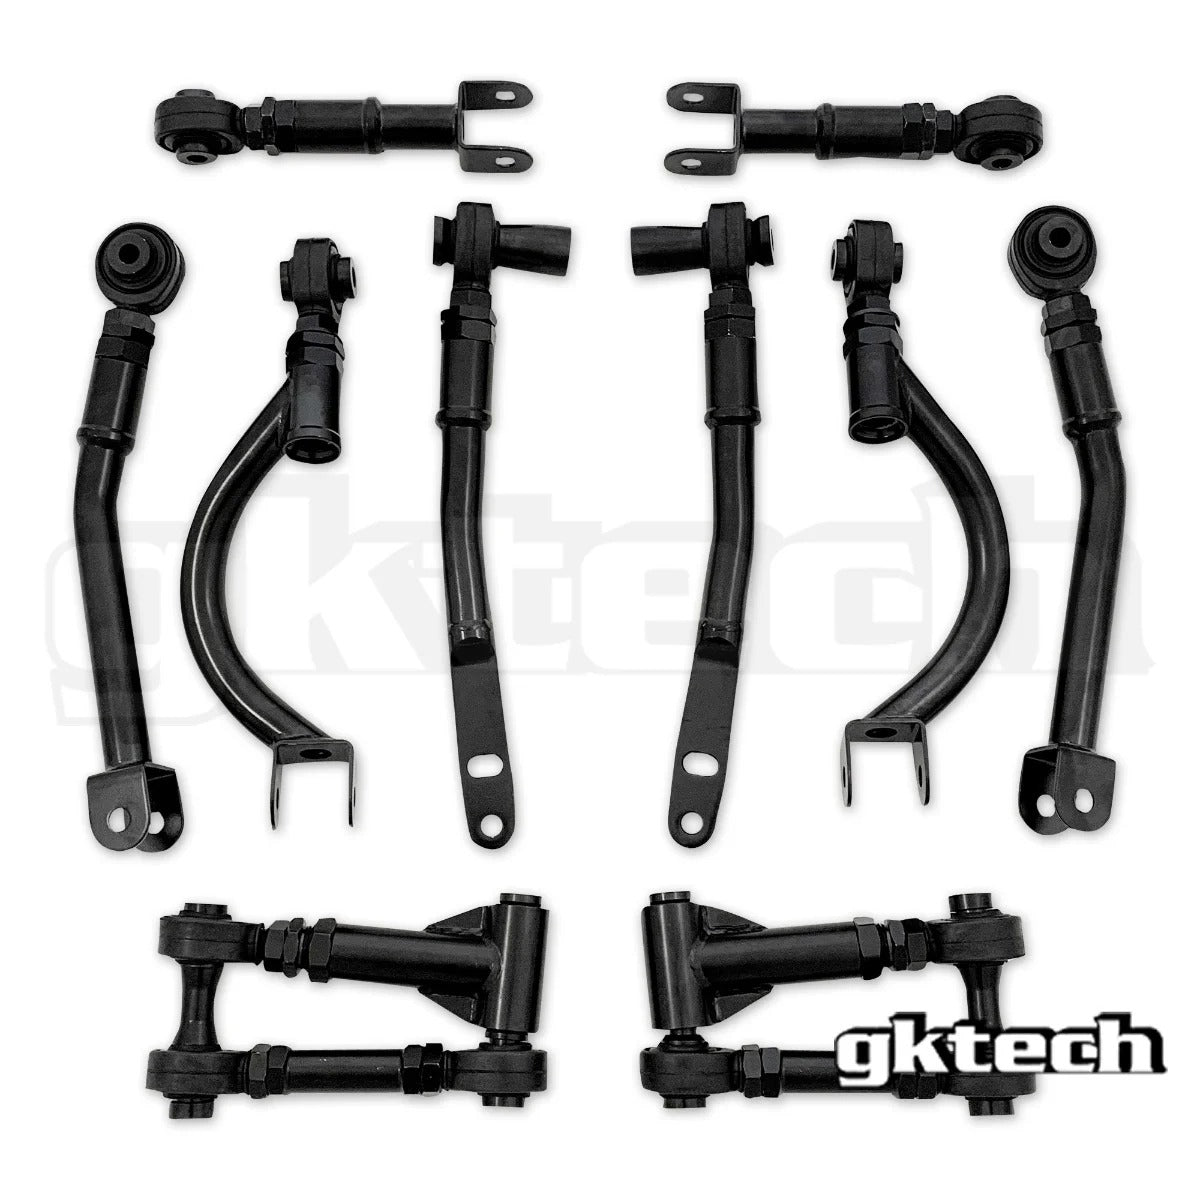 V4 - R32 Skyline Suspension arm package (10% combo discount)